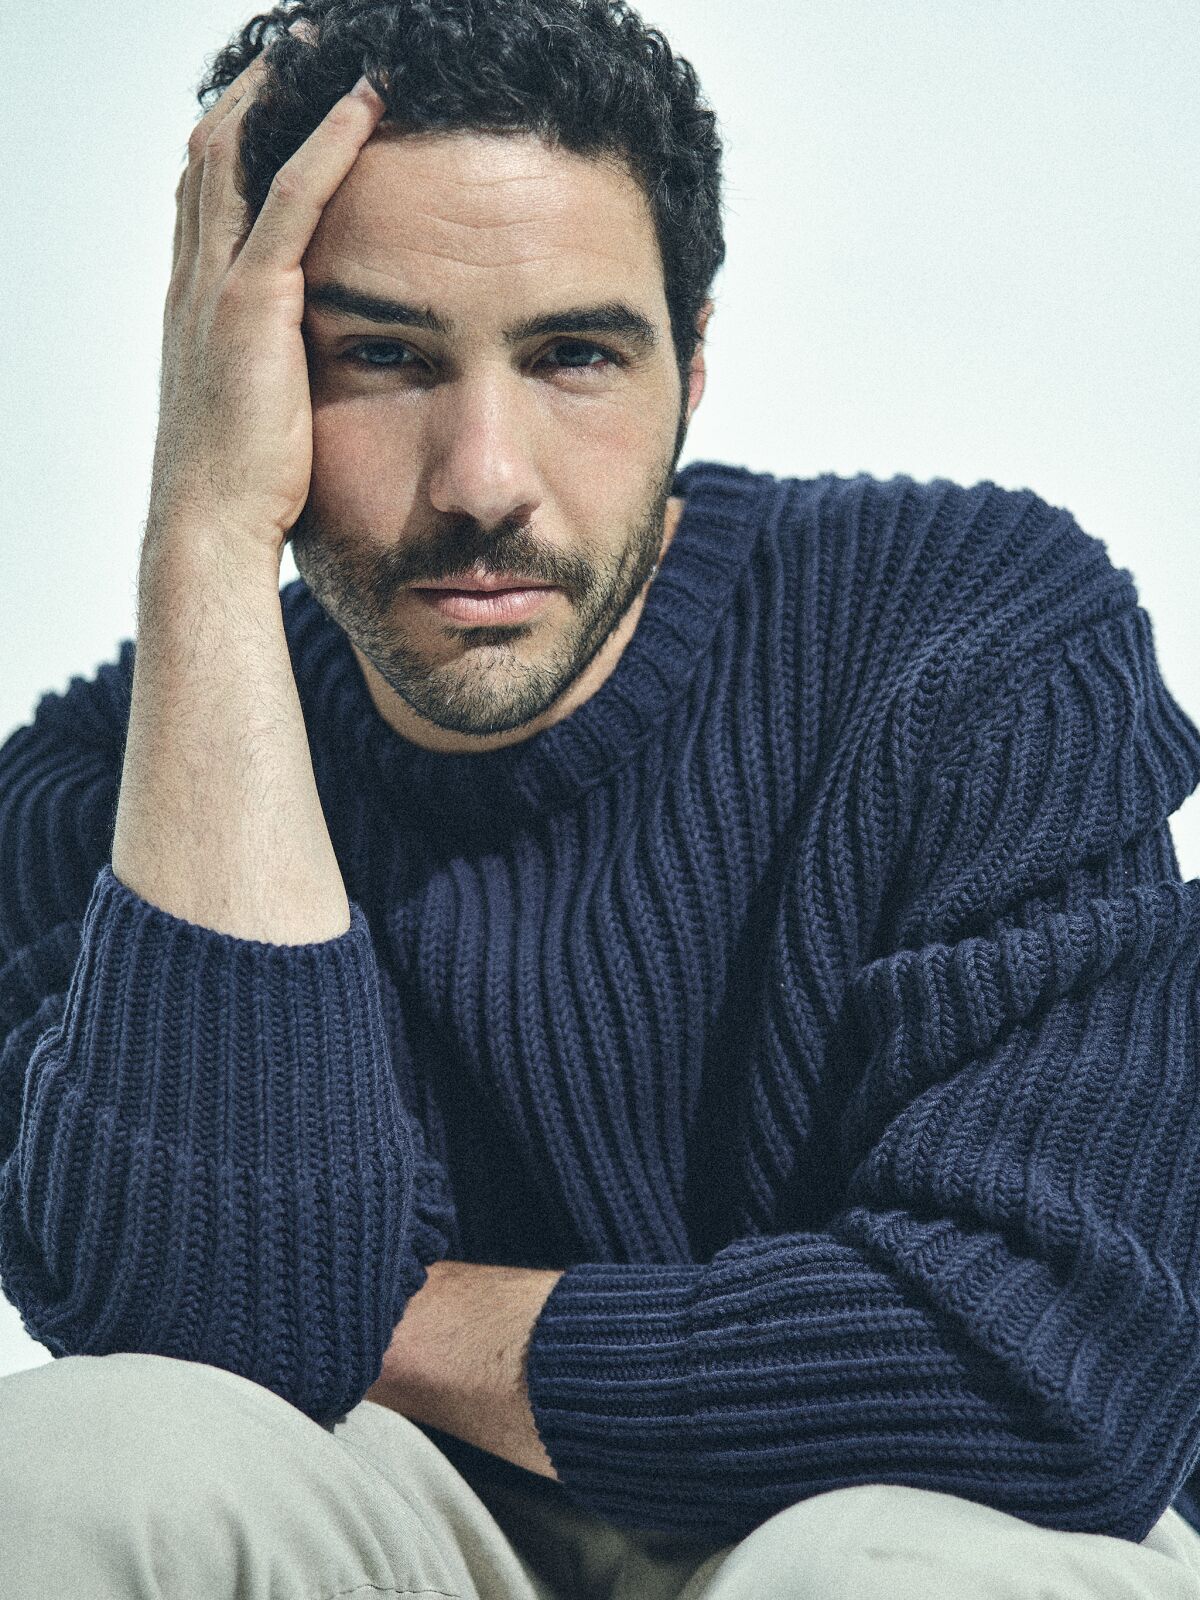 French-born actor Tahar Rahim who stars in "The Mauritanian" with Jodie Foster.